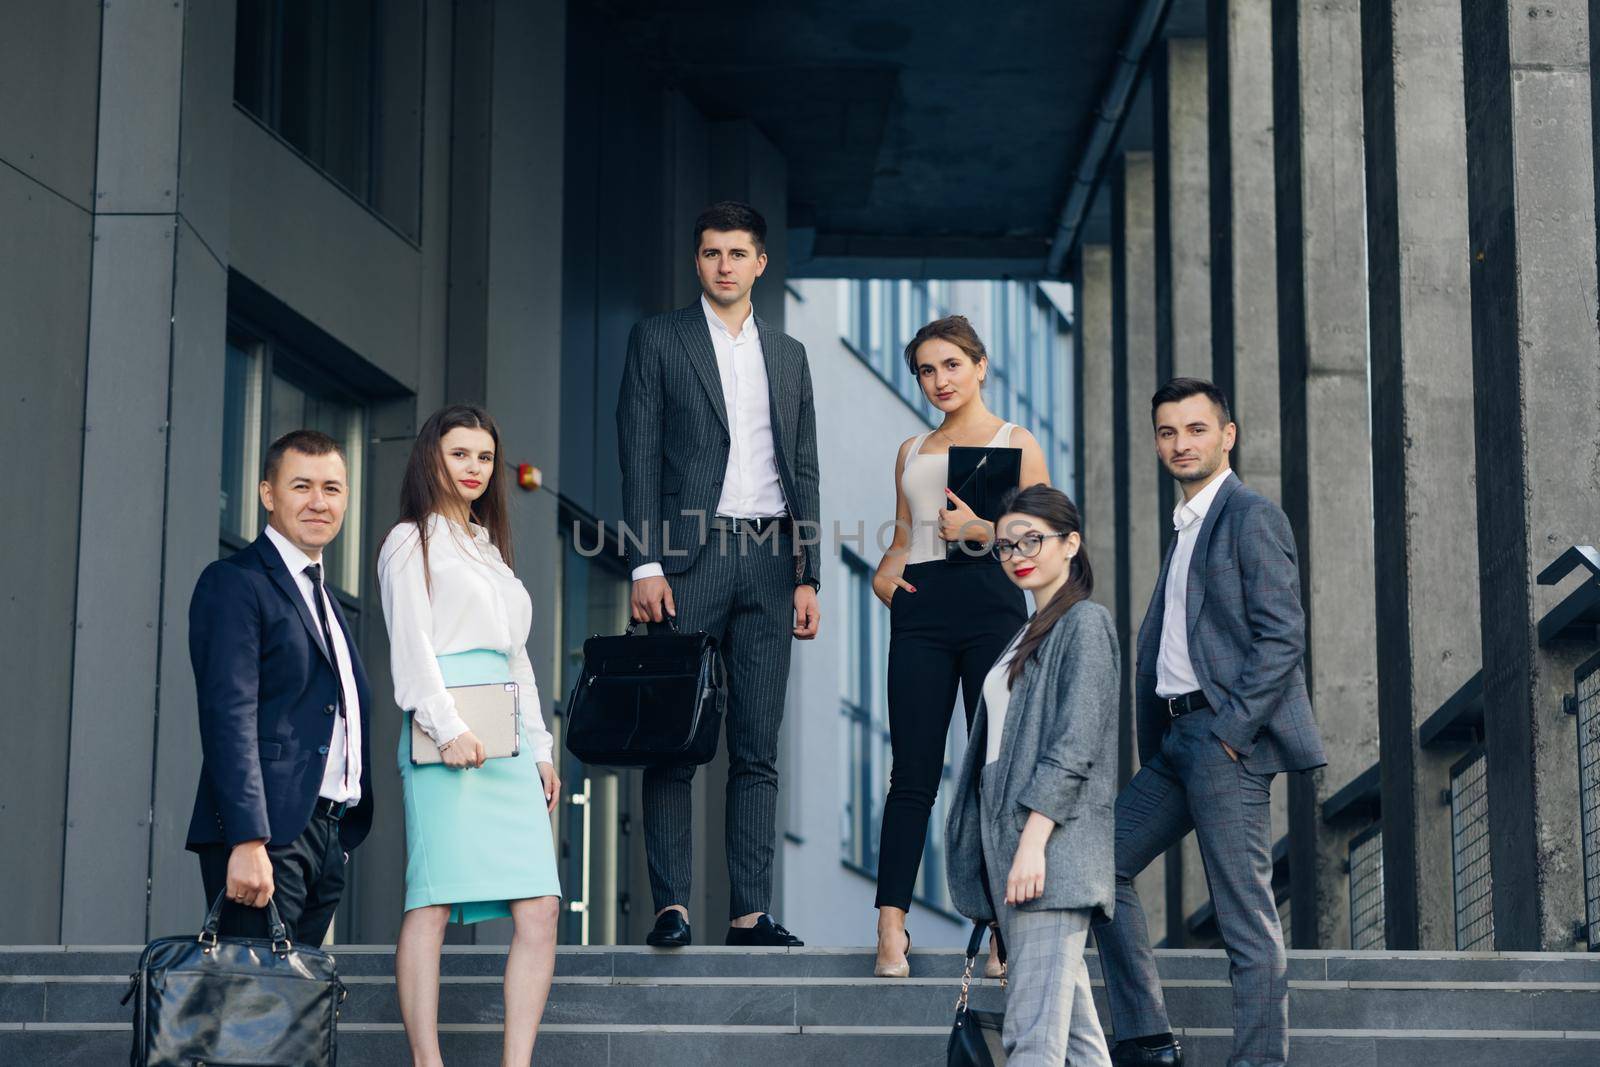 Portrait of successful creative businessman and businesswoman wear formal suits looking at camera and smiling in modern office workplace. Diverse male and female standing together.